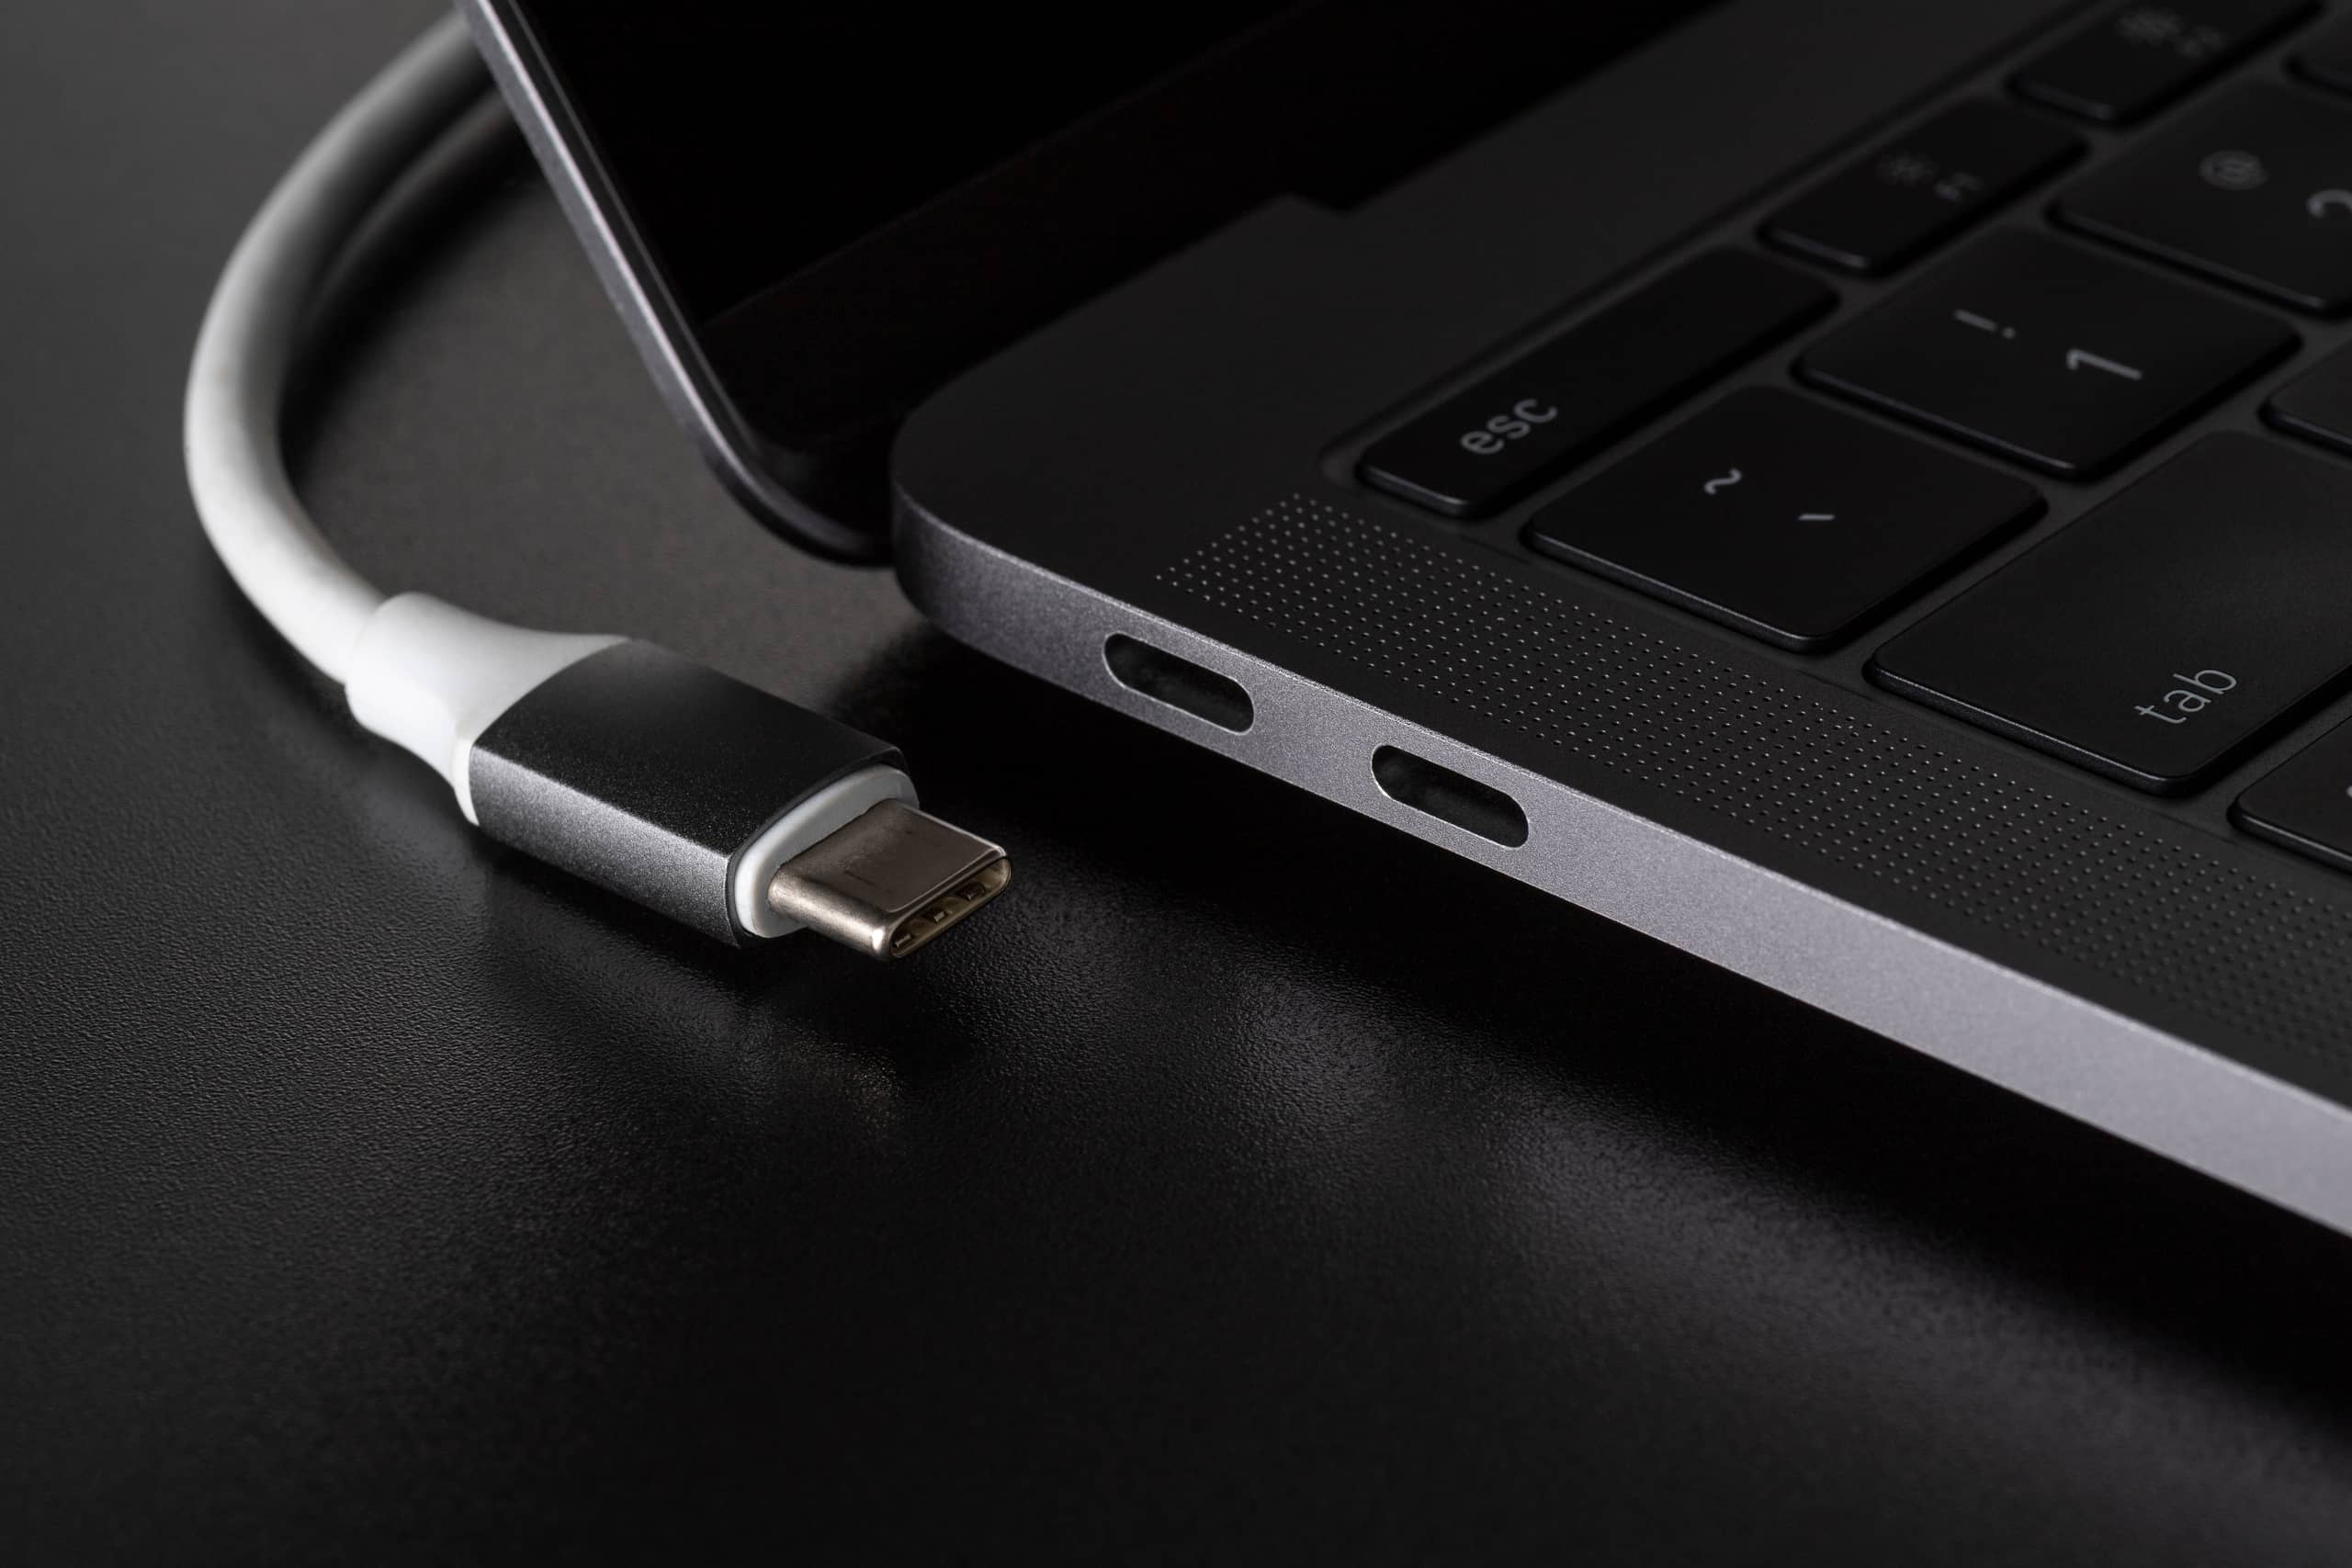 USB 4 will double the speed of USB 3.2 to 40Gbps